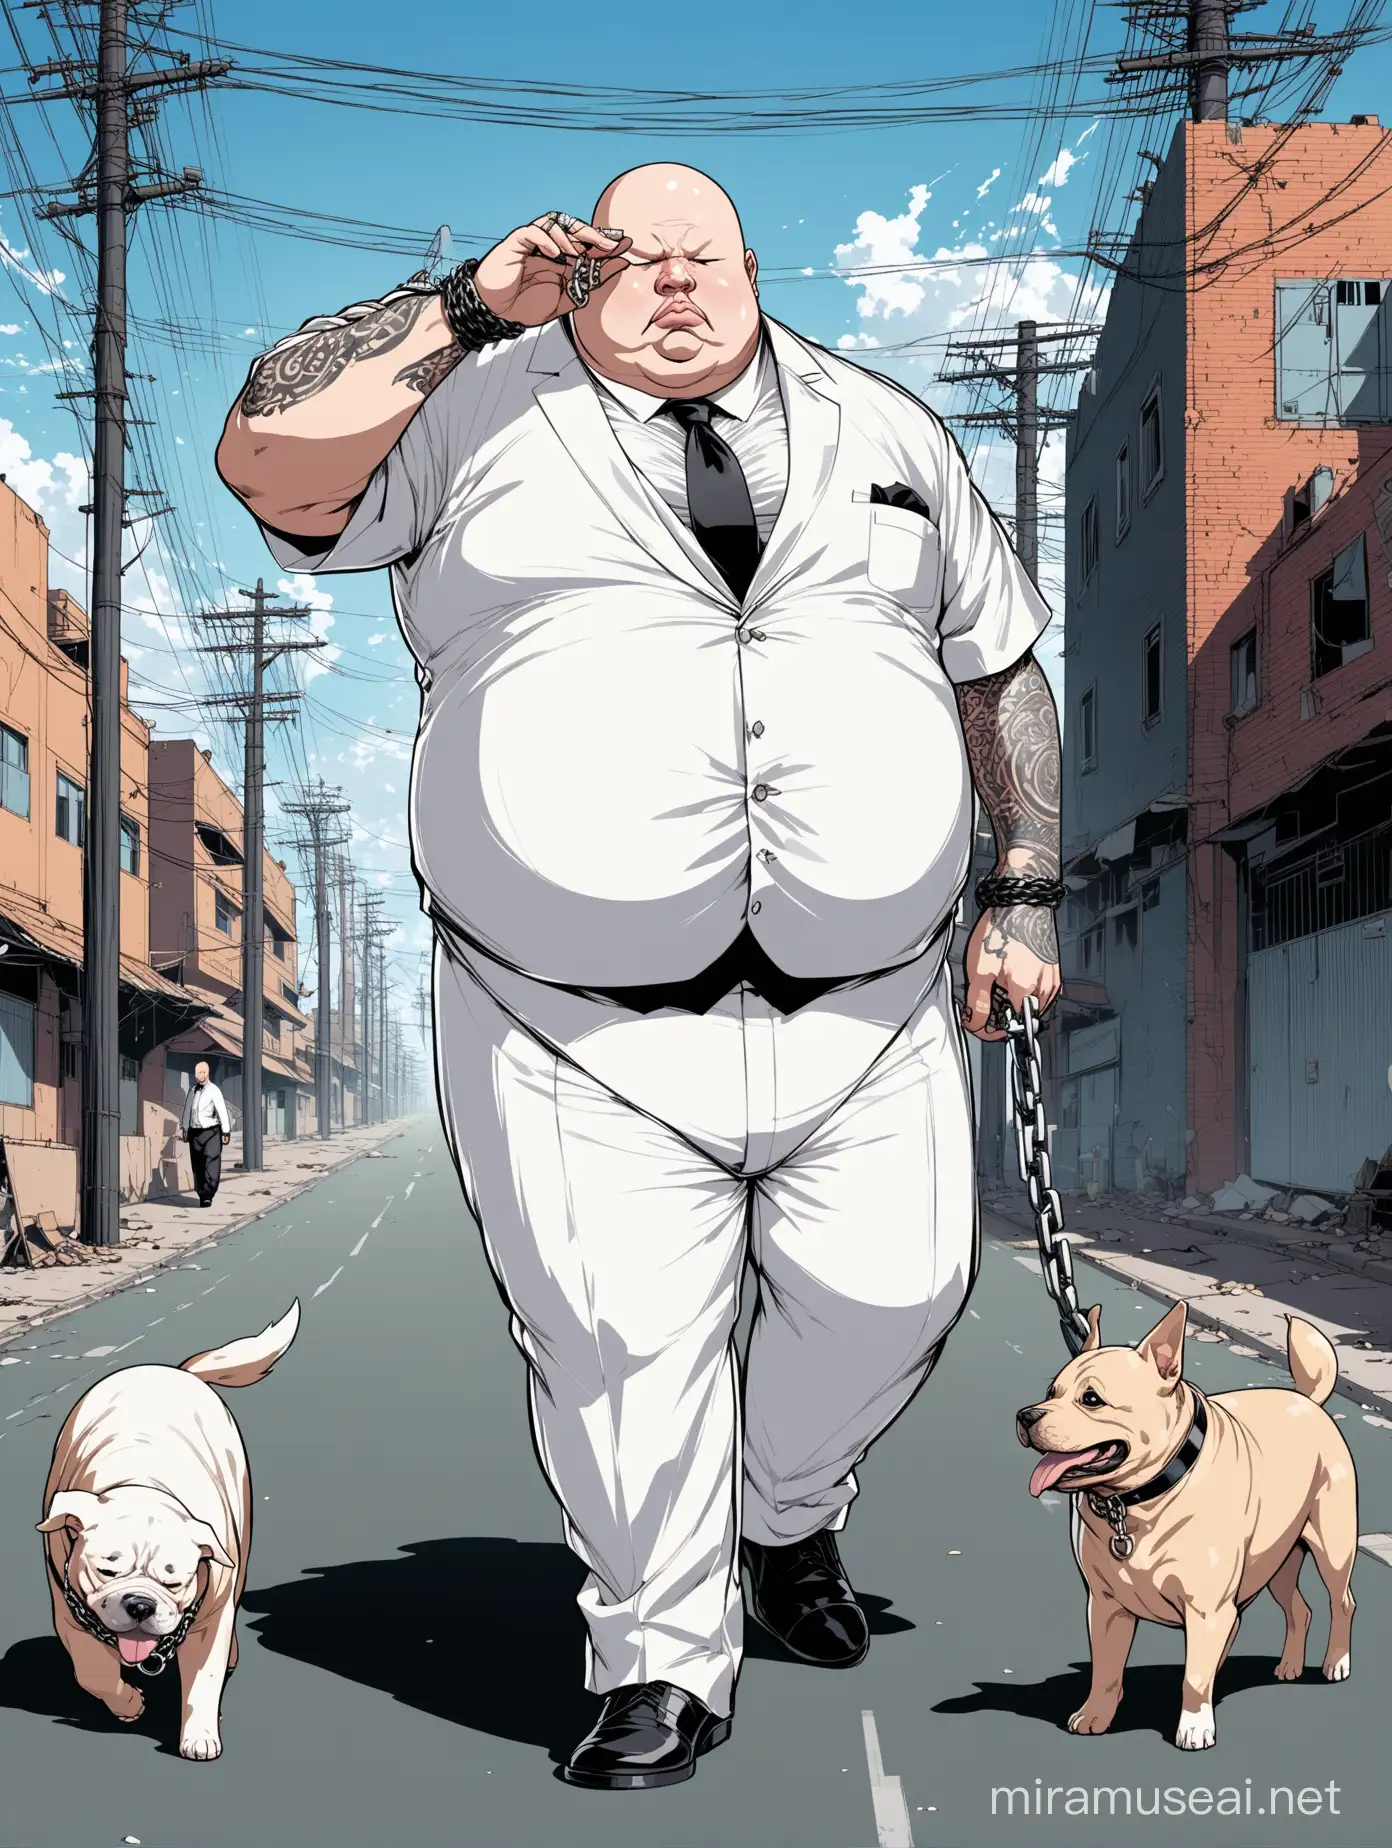 Intimidating Gang Leader with Dog in Urban Setting